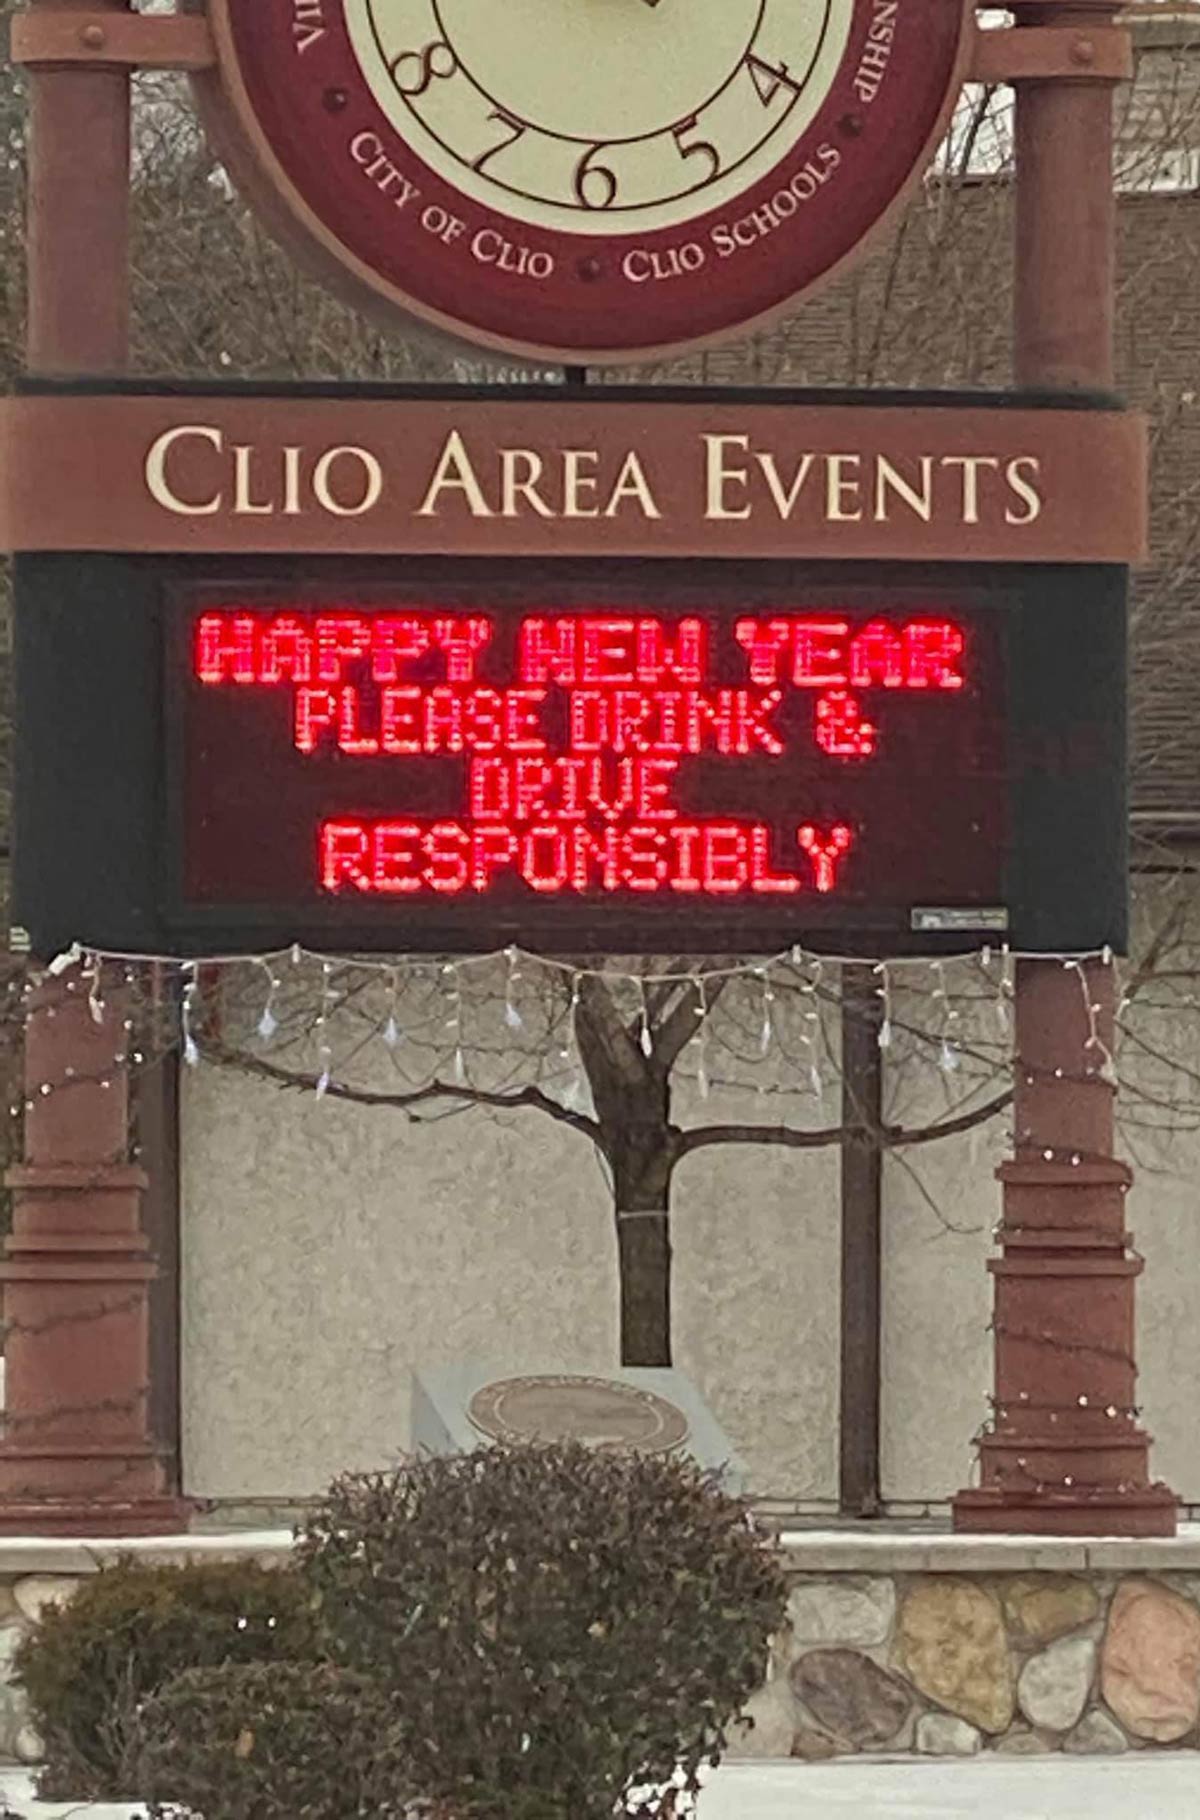 Please Drink & Drive Responsibly